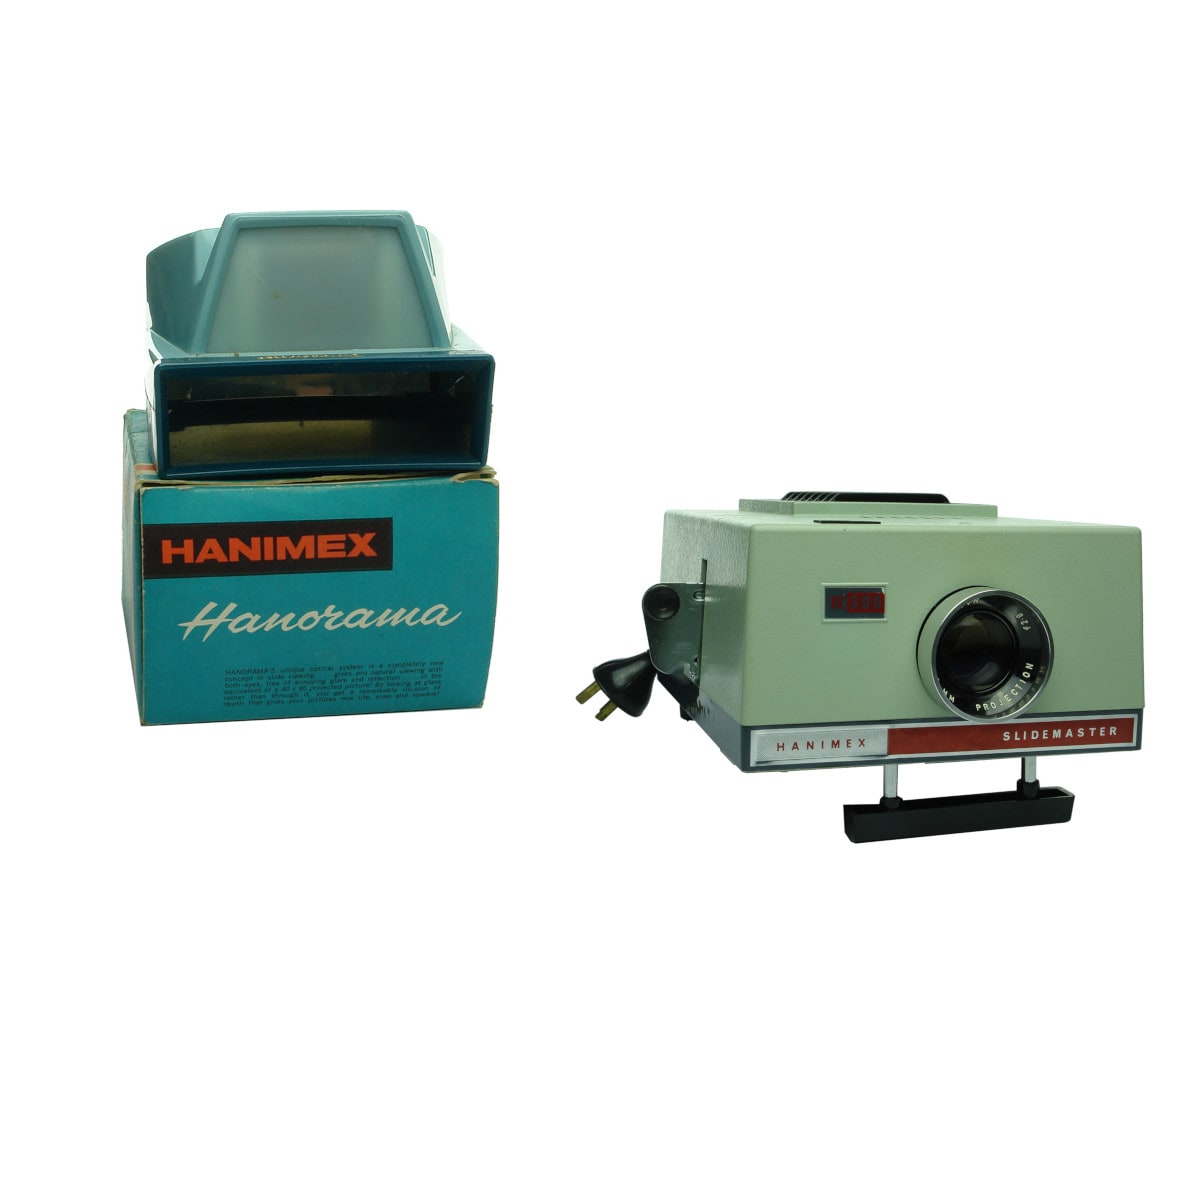 2 Hanimex Slide viewing products. Hanorama 3 Dimensional Viewer and Slidemaster 300. Both with original boxes.